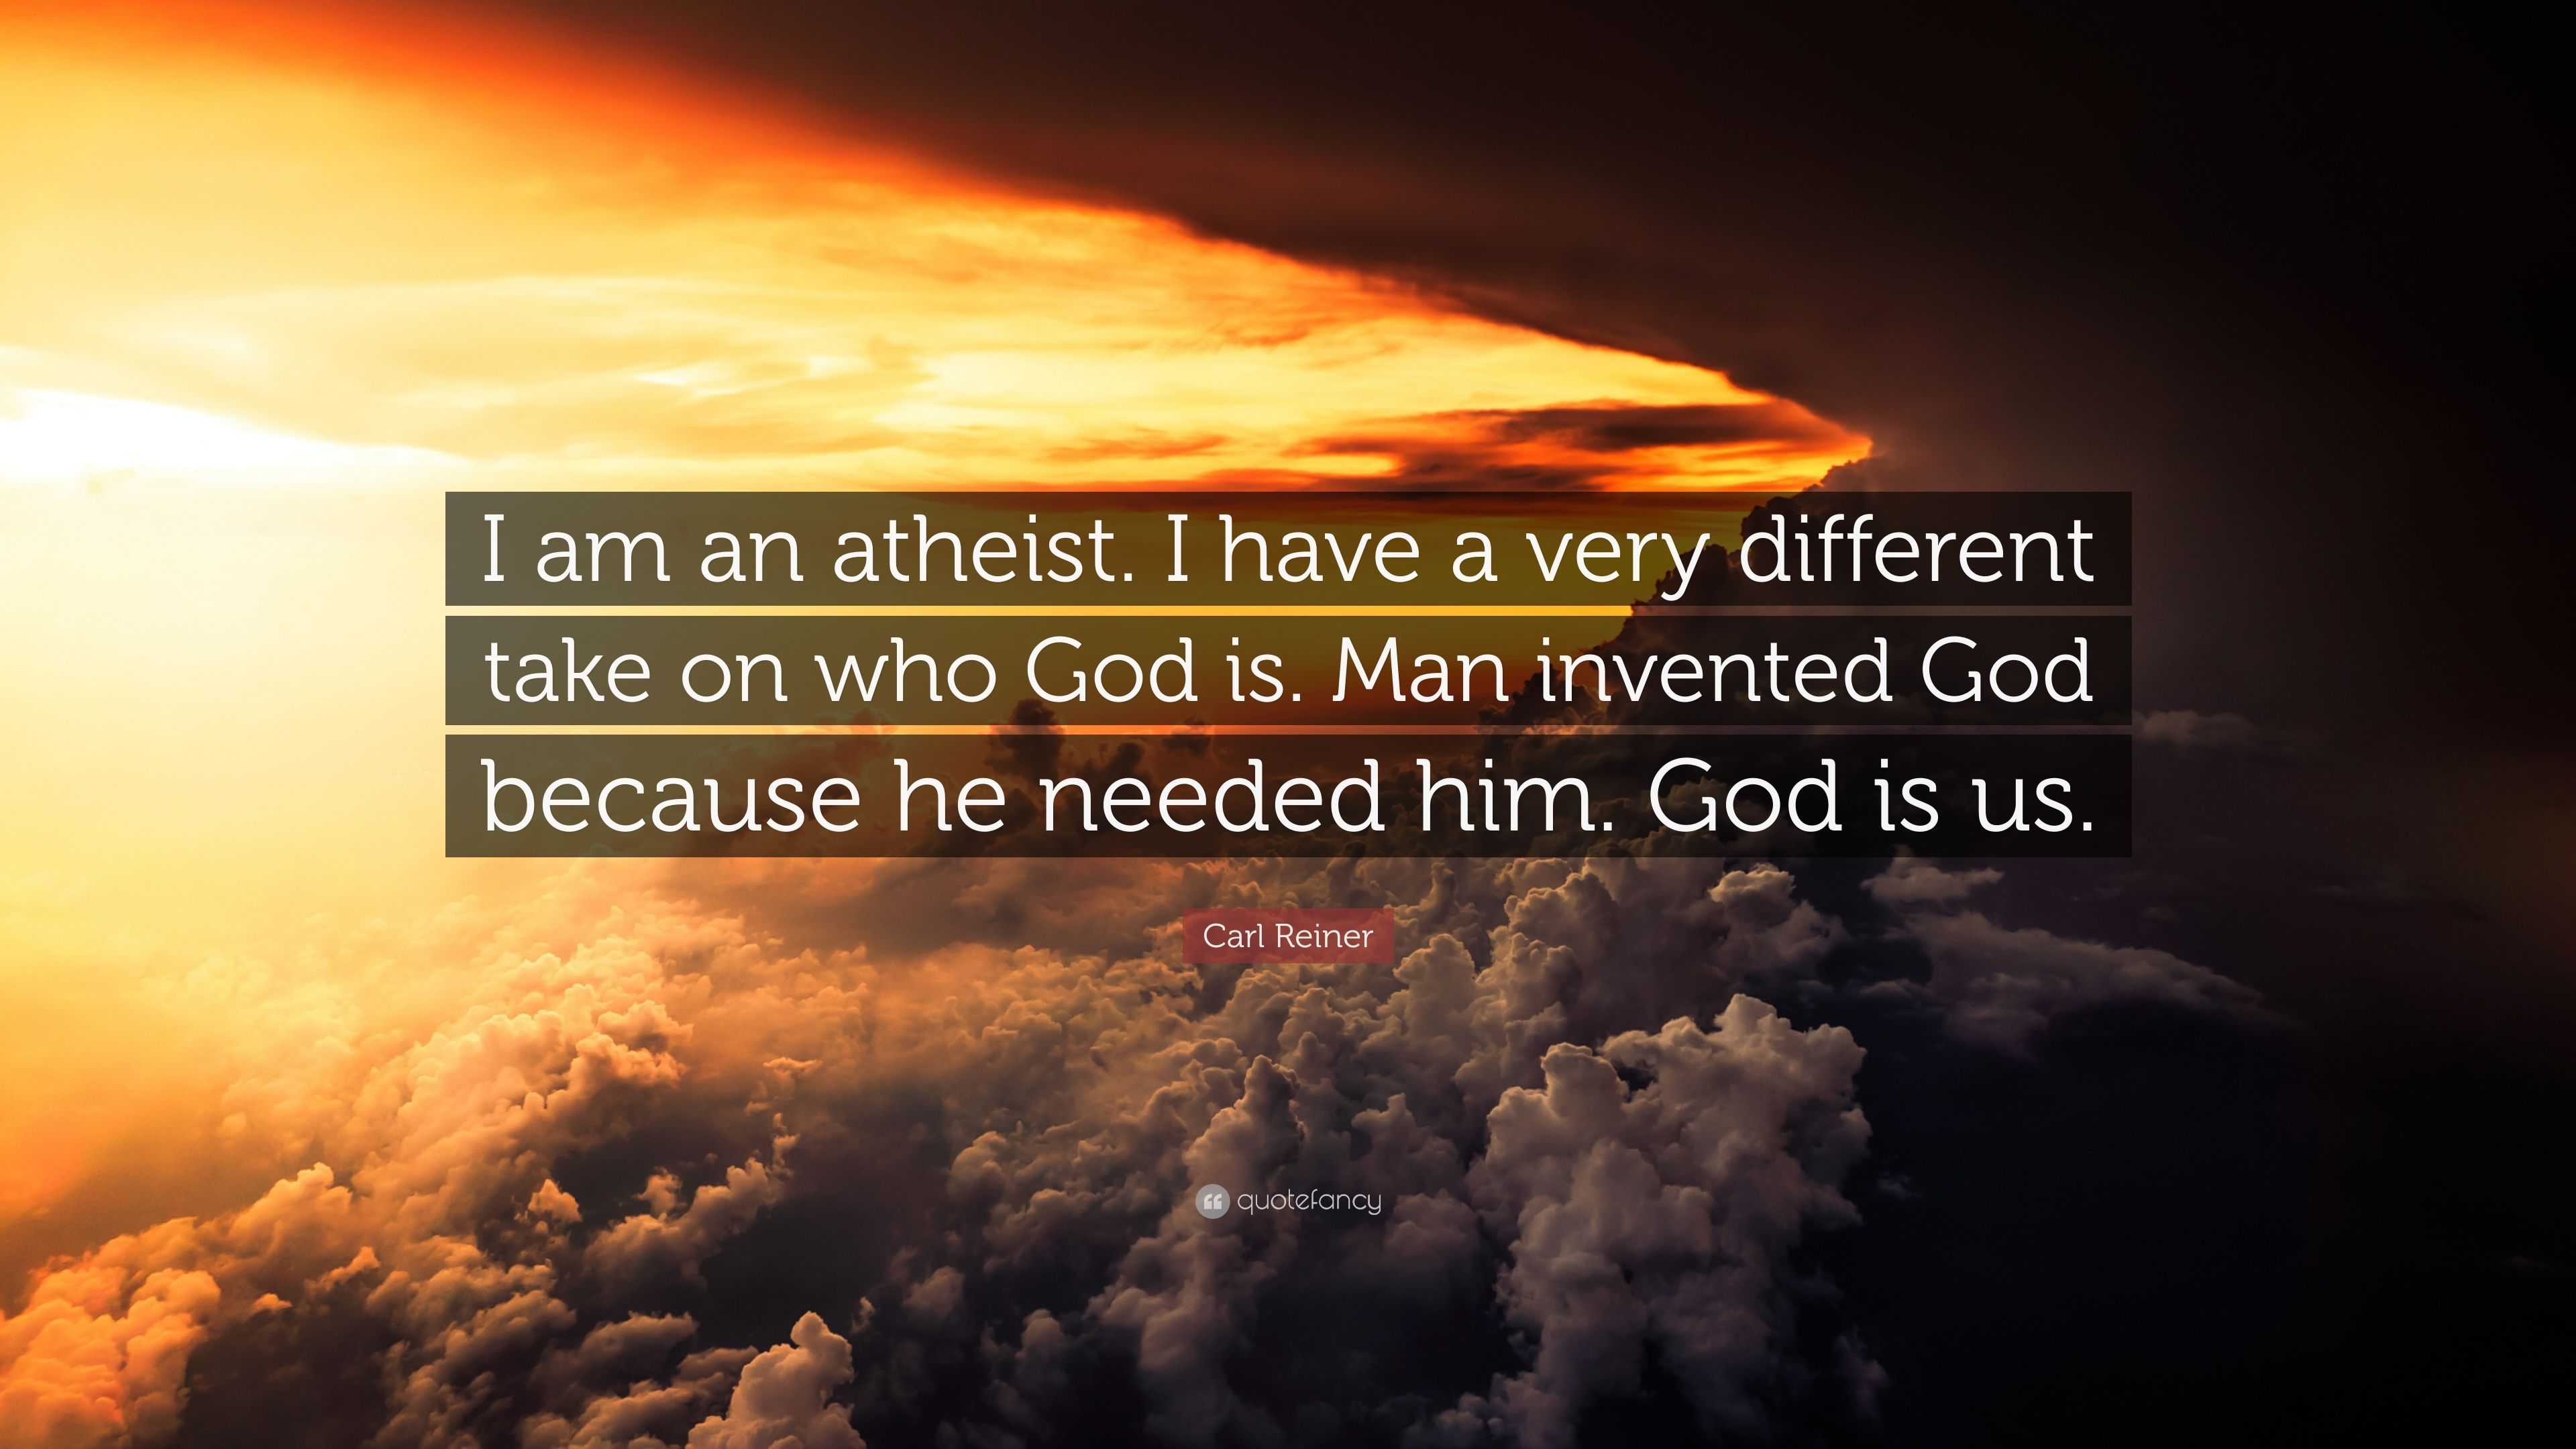 Carl Reiner Quote “I am an atheist. I have a very different take on